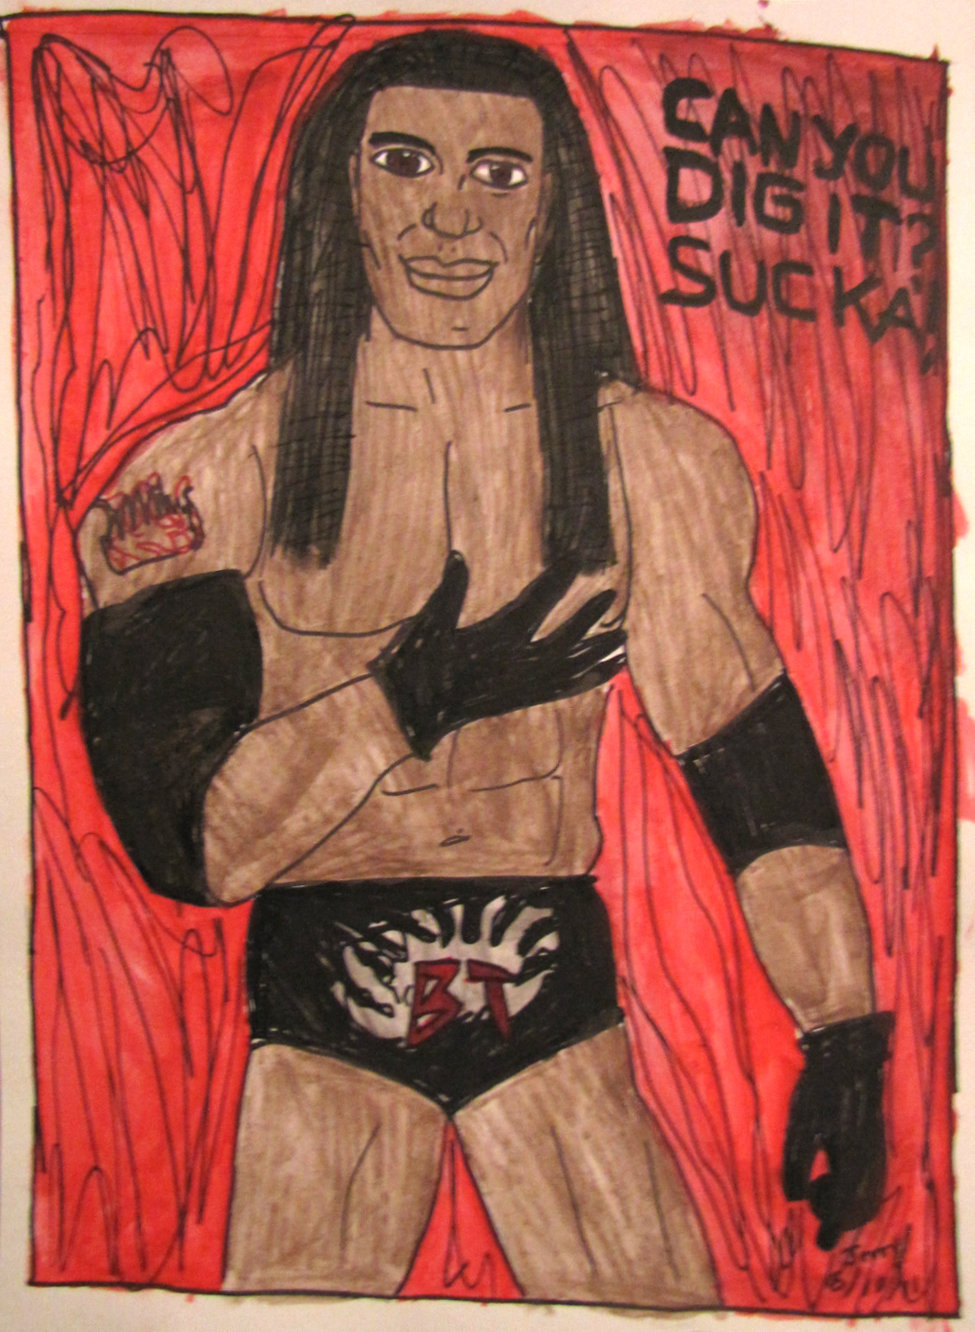 Booker T (aka “Can you dig it sucka?”)